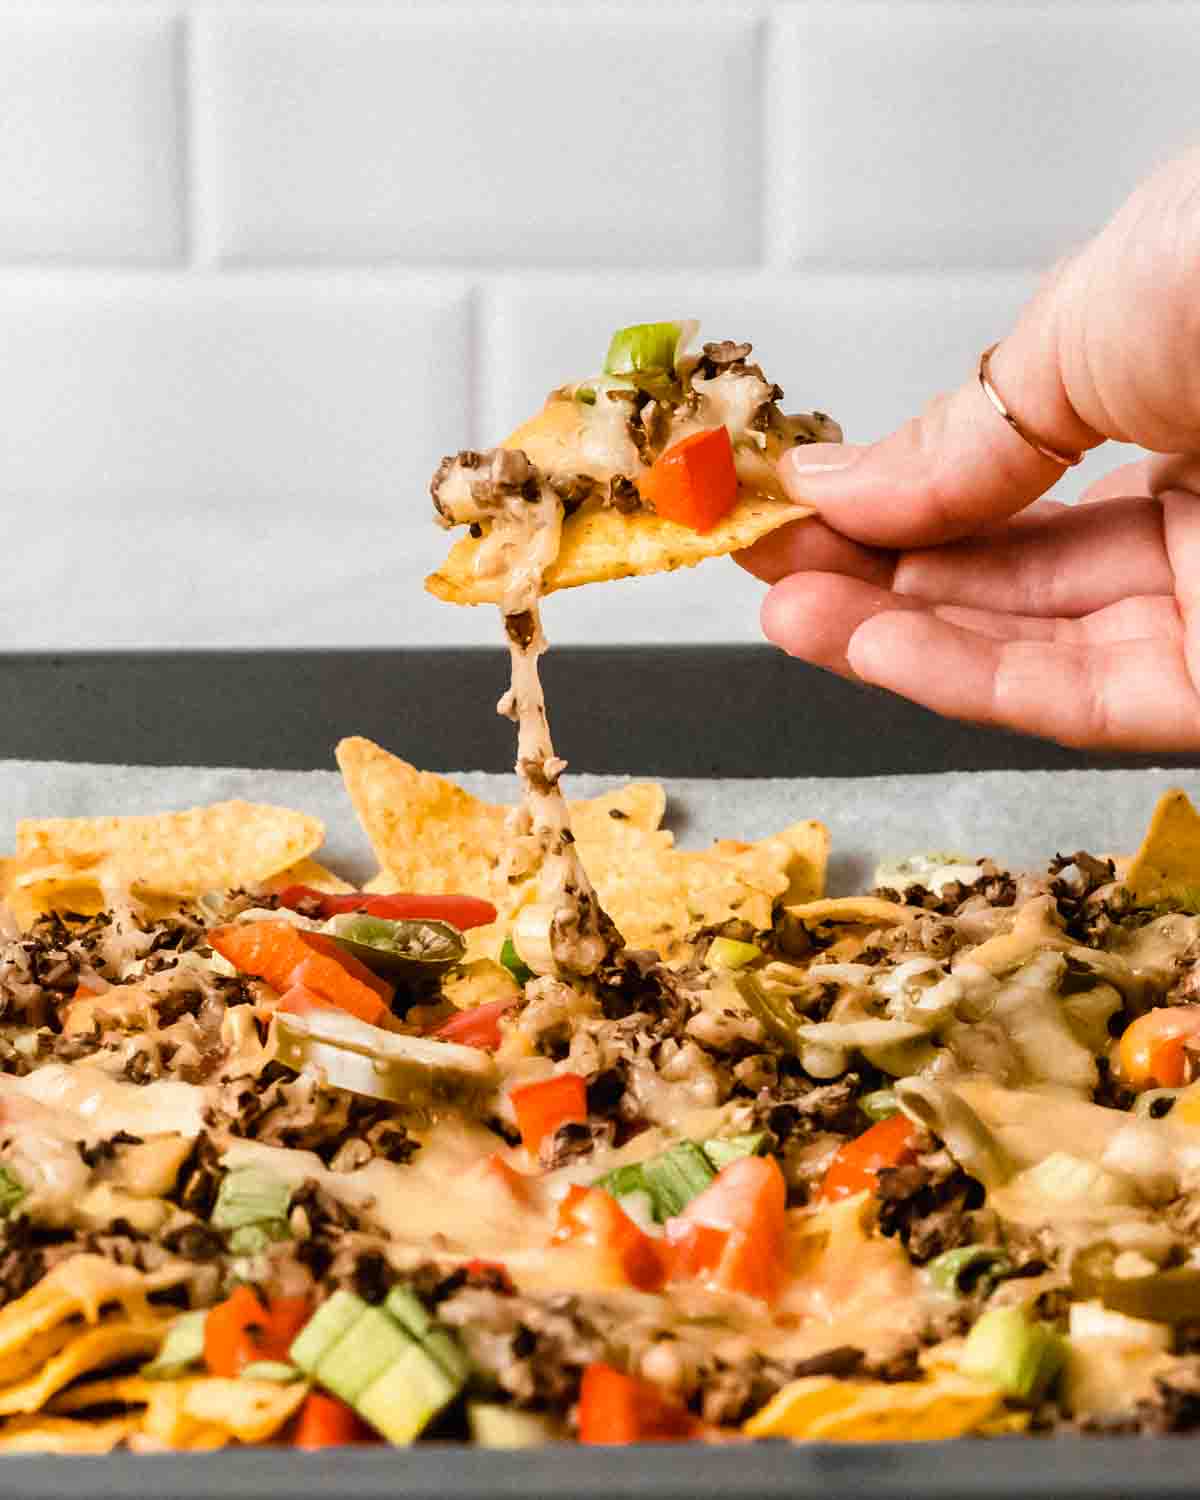 one loaded nacho being pulled out from the other nachos.